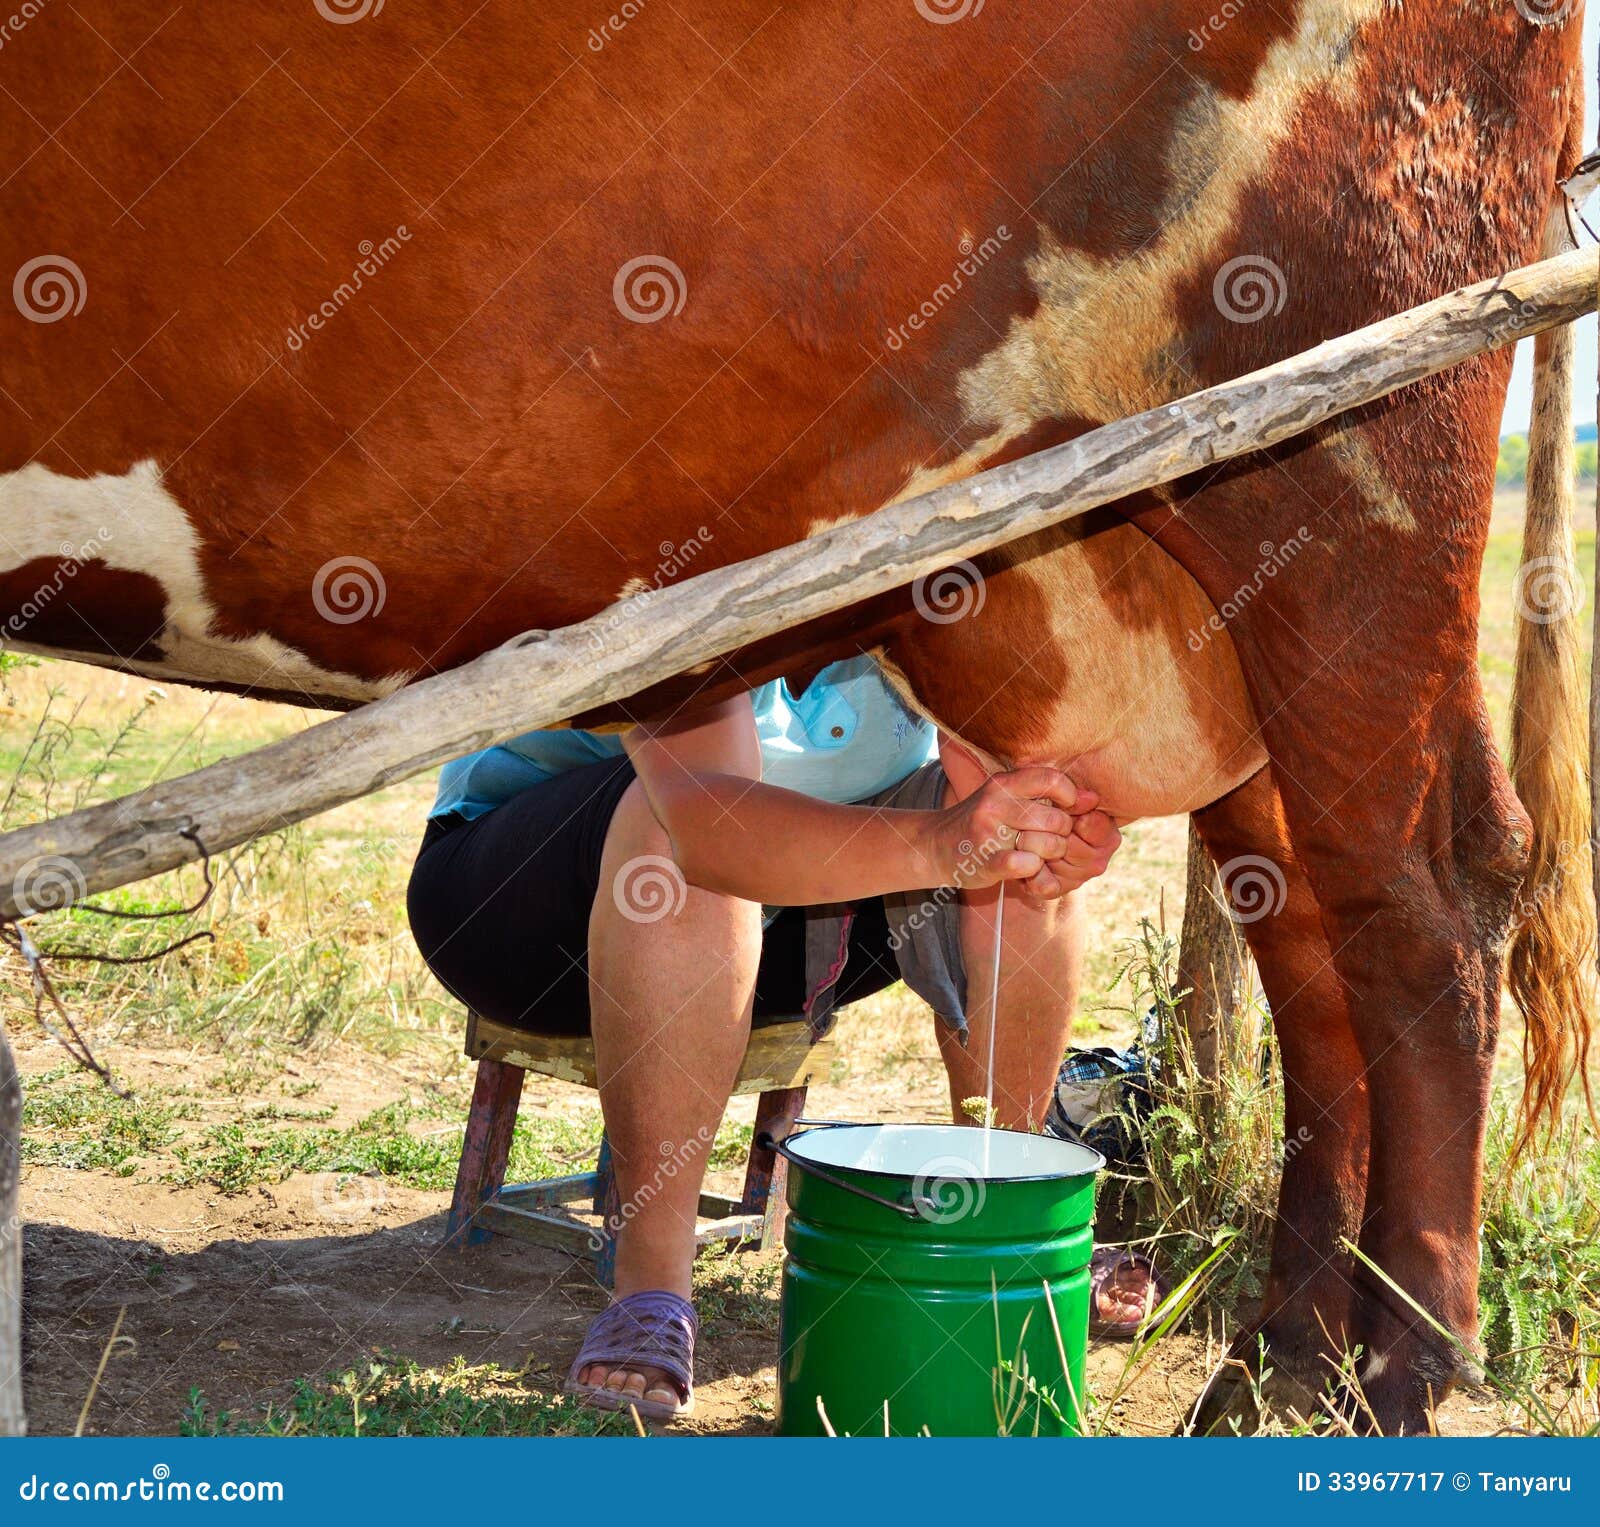 milkmaid milking a cow square format